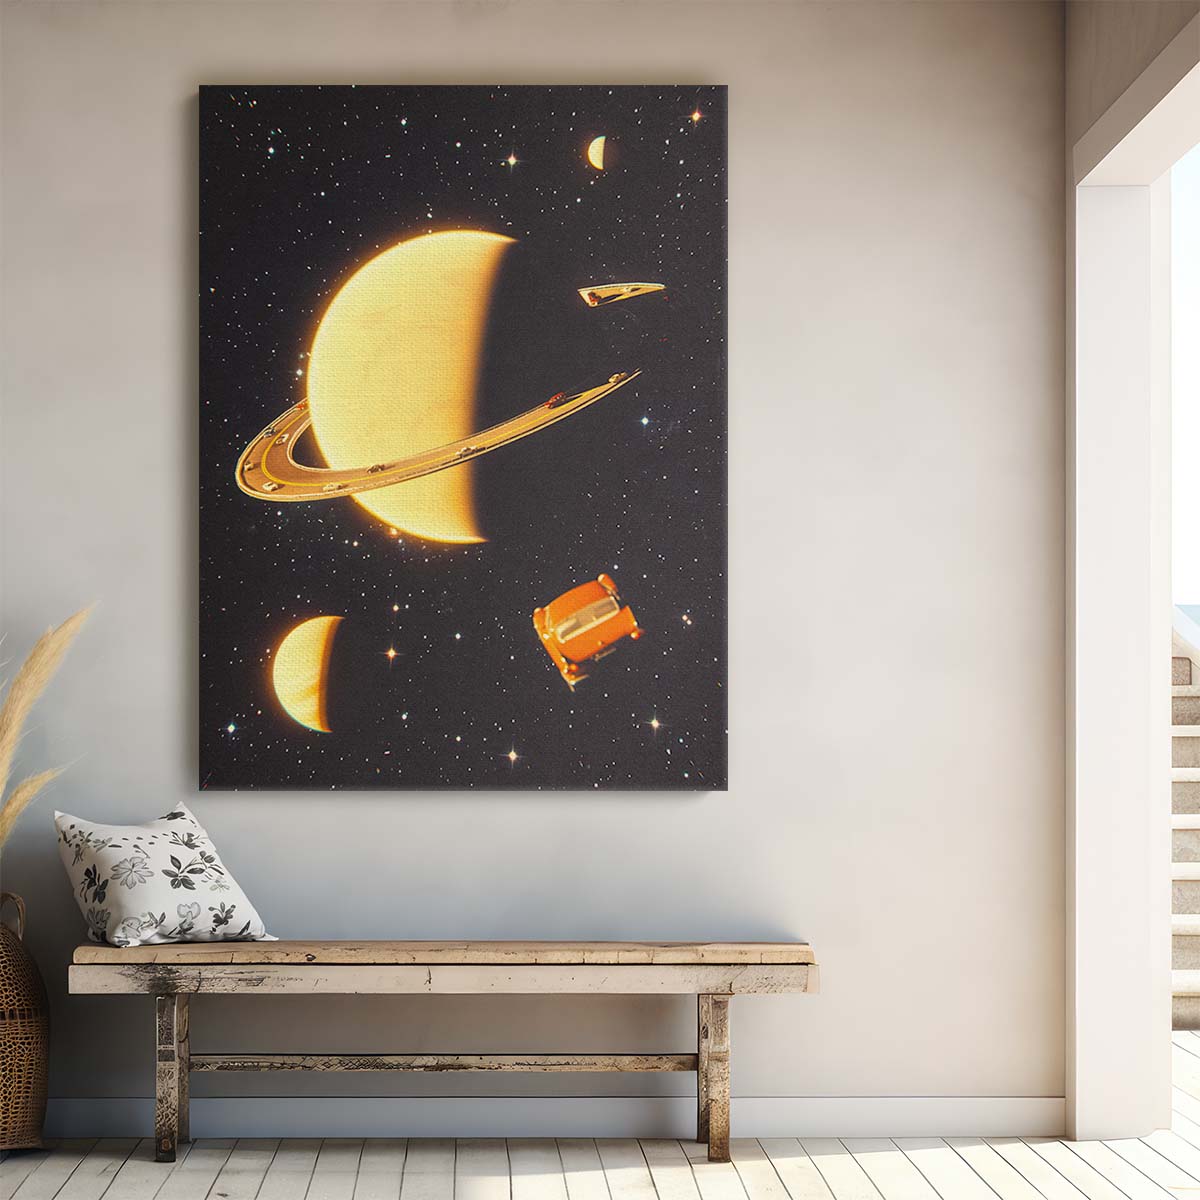 Surreal Saturn Rings Illustration, Retro Futuristic Space Collage Art by Luxuriance Designs, made in USA